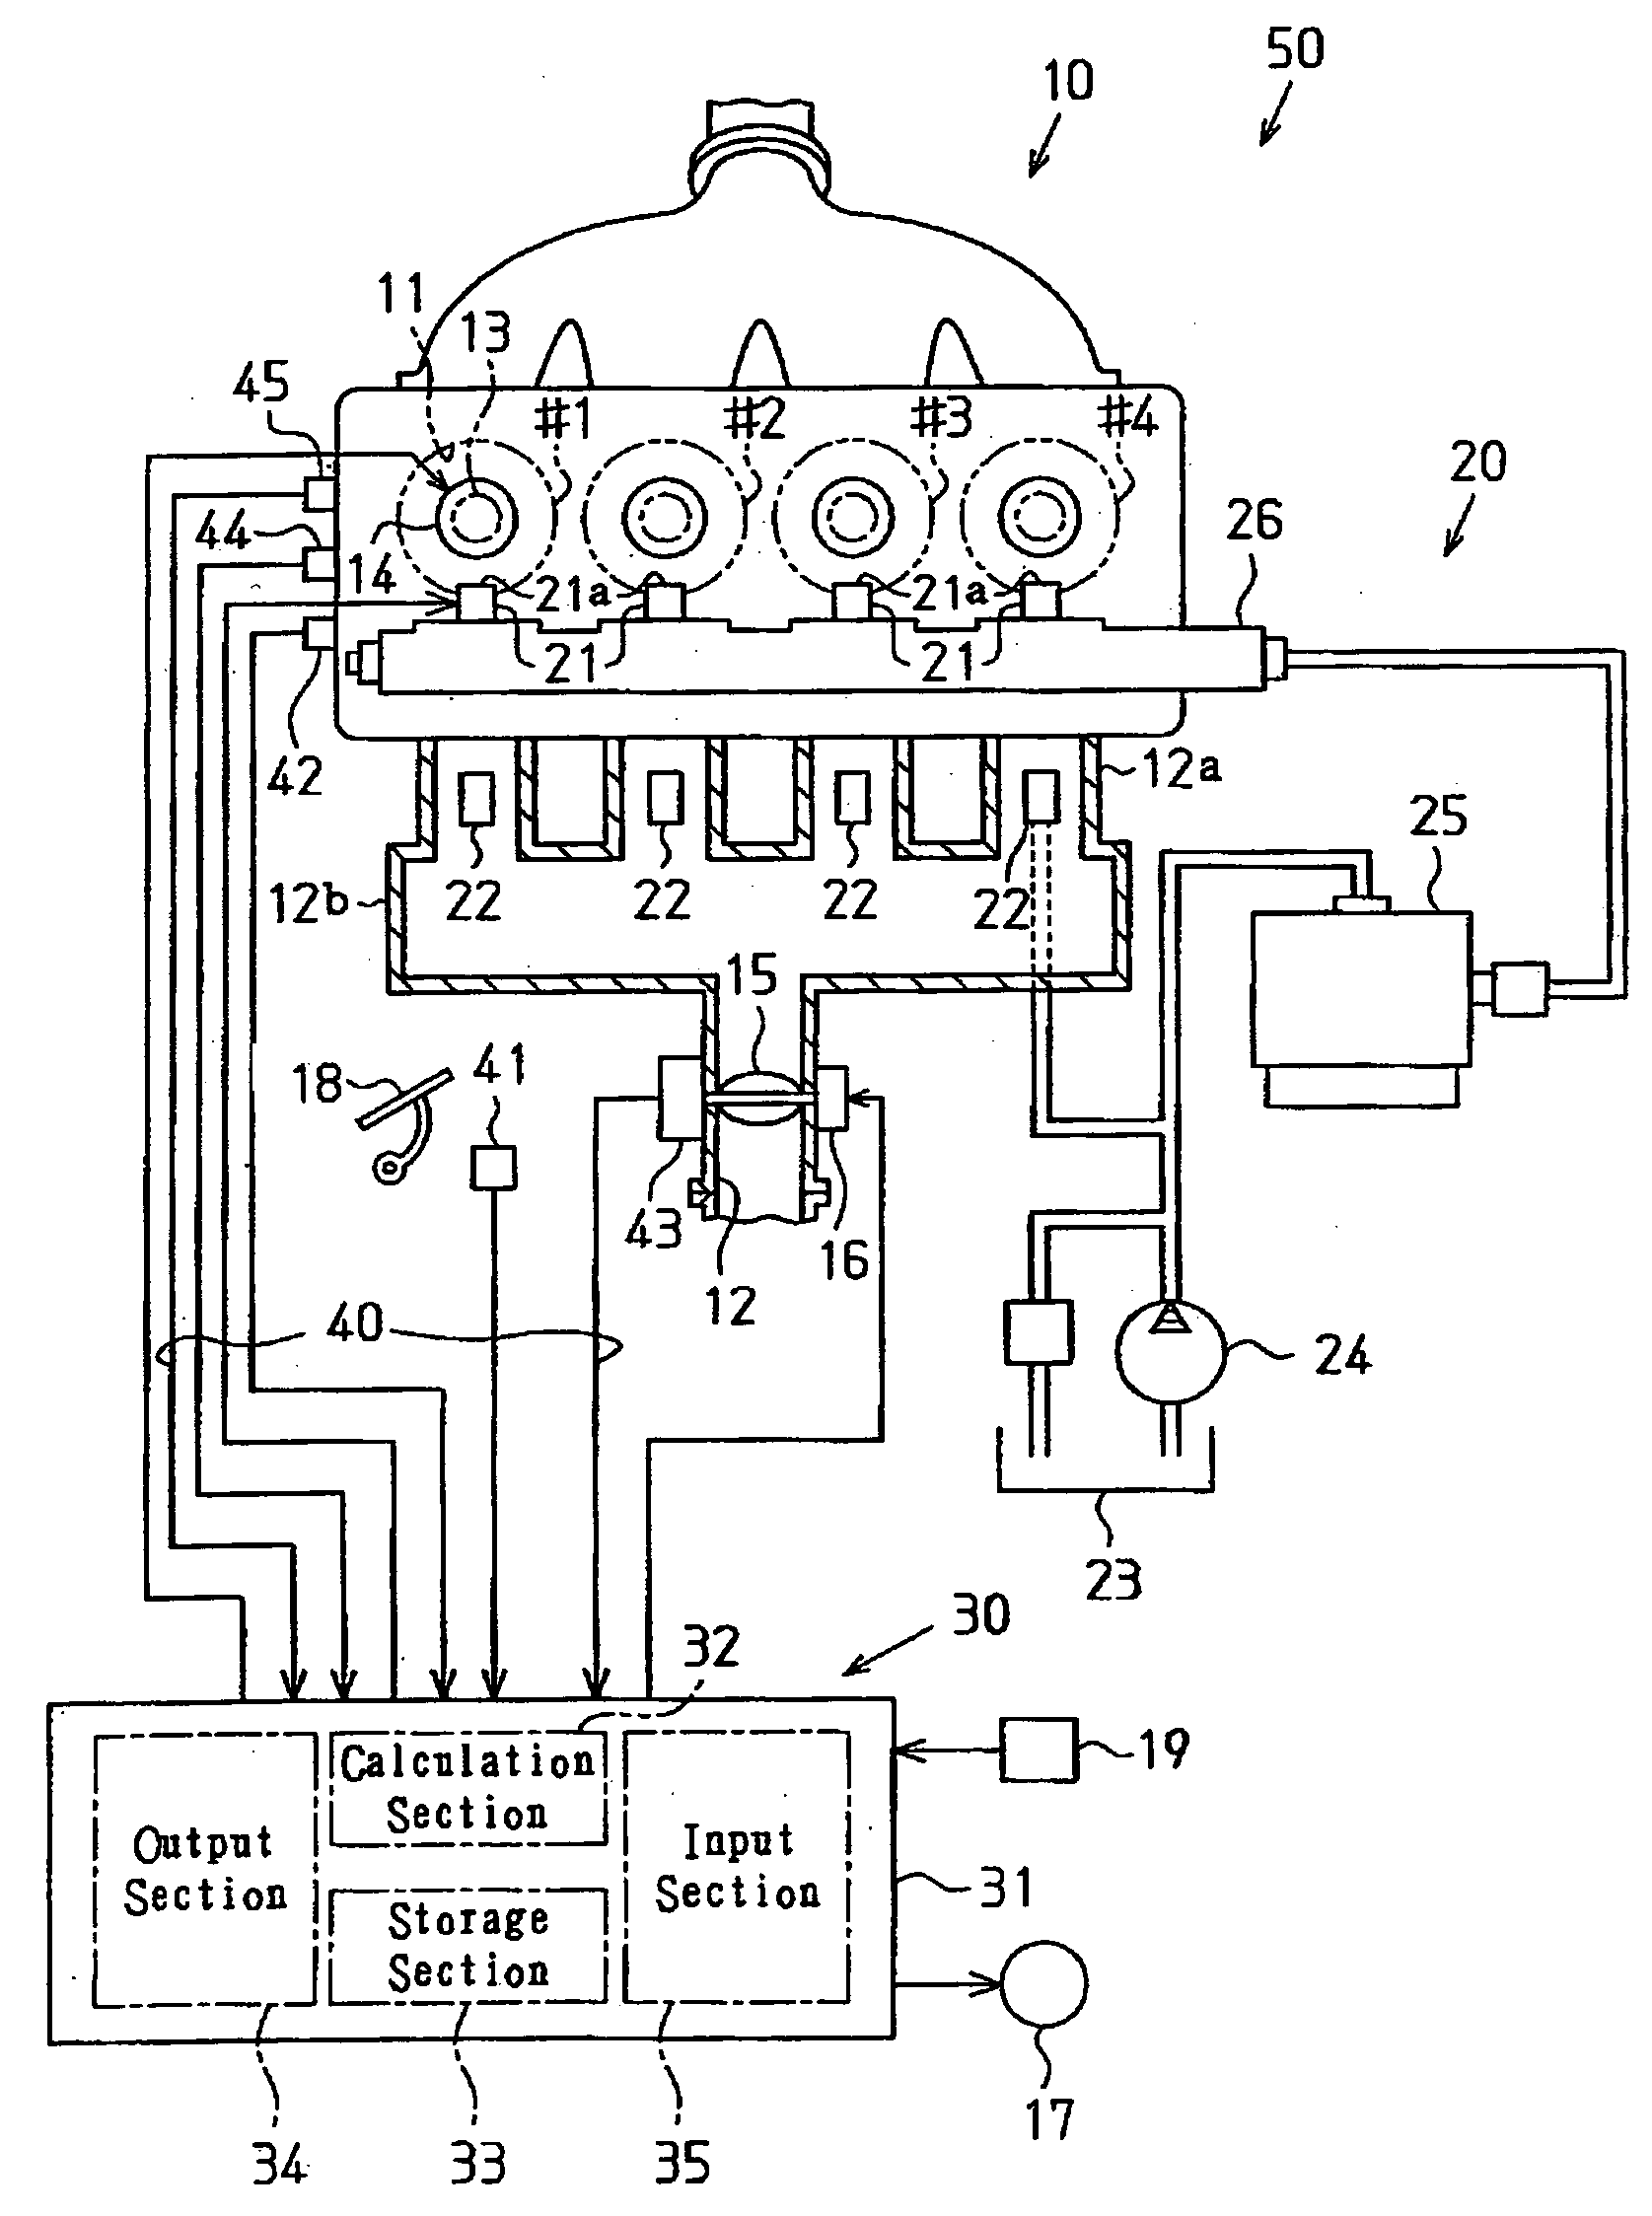 Injection controller for internal combustion engine